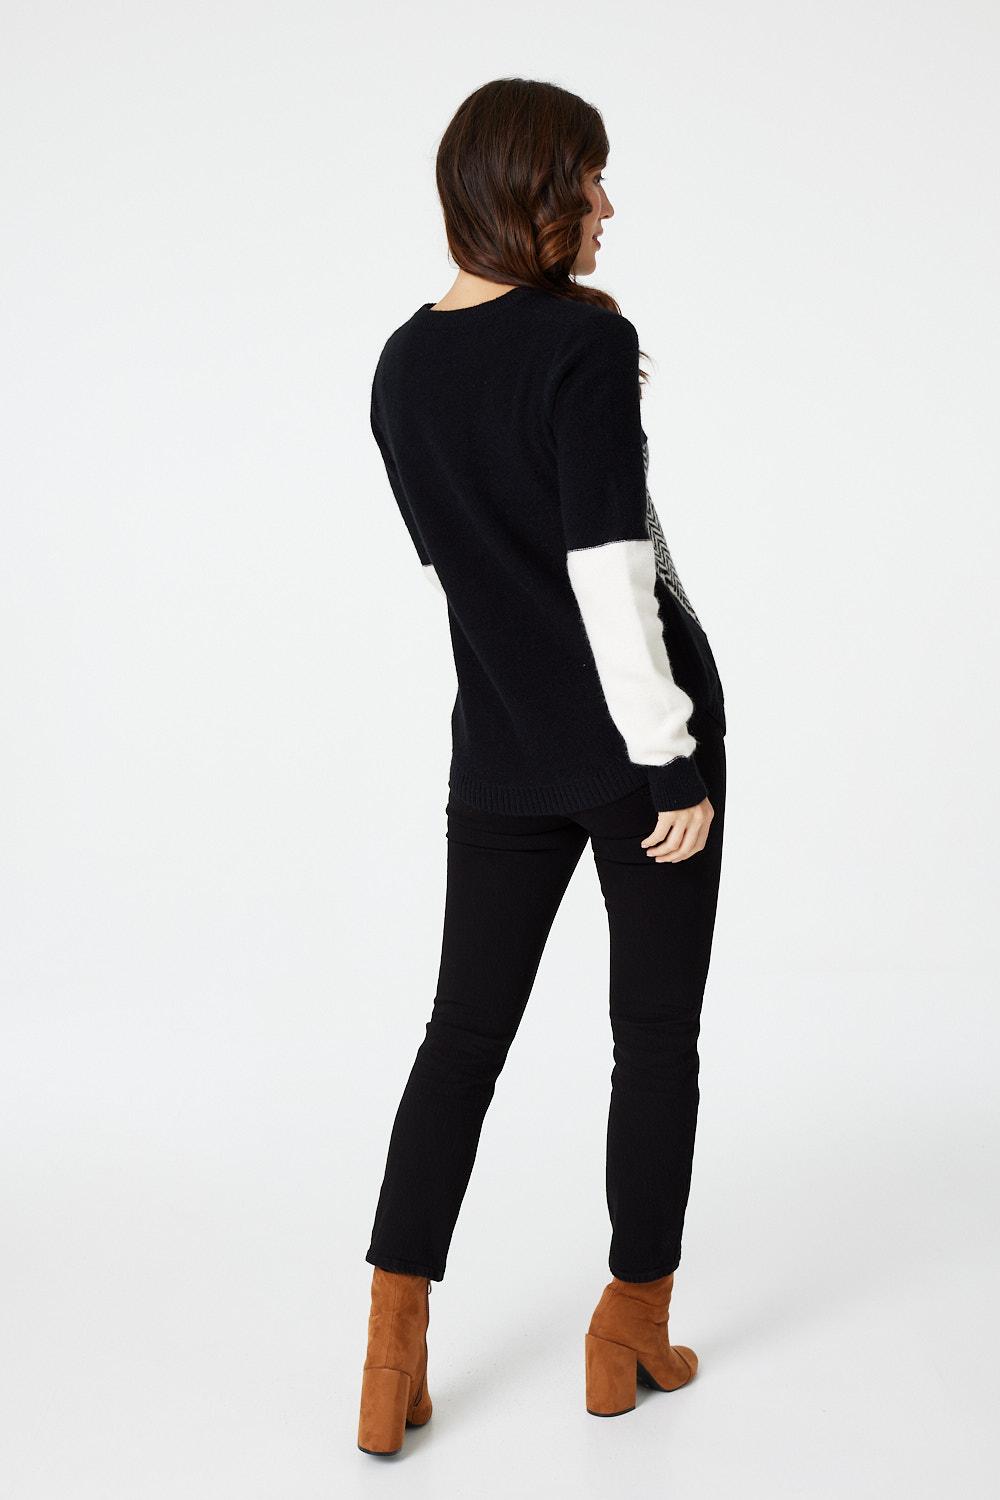 Black | Colour Block Knitted Jumper